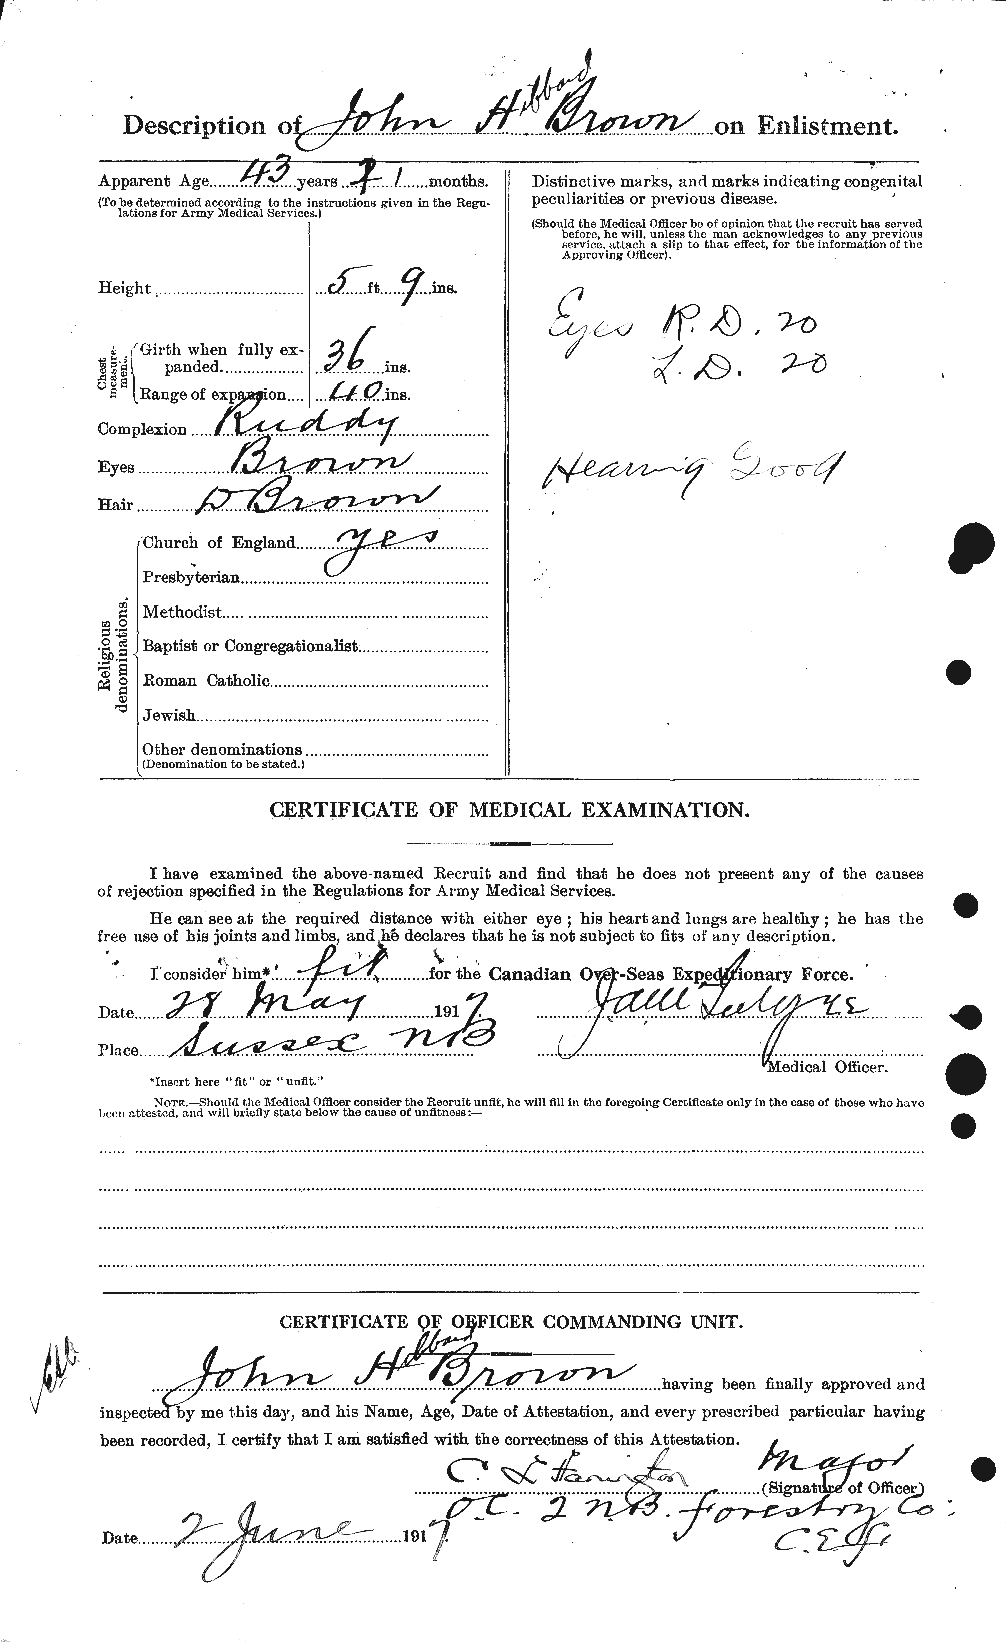 Personnel Records of the First World War - CEF 264622b